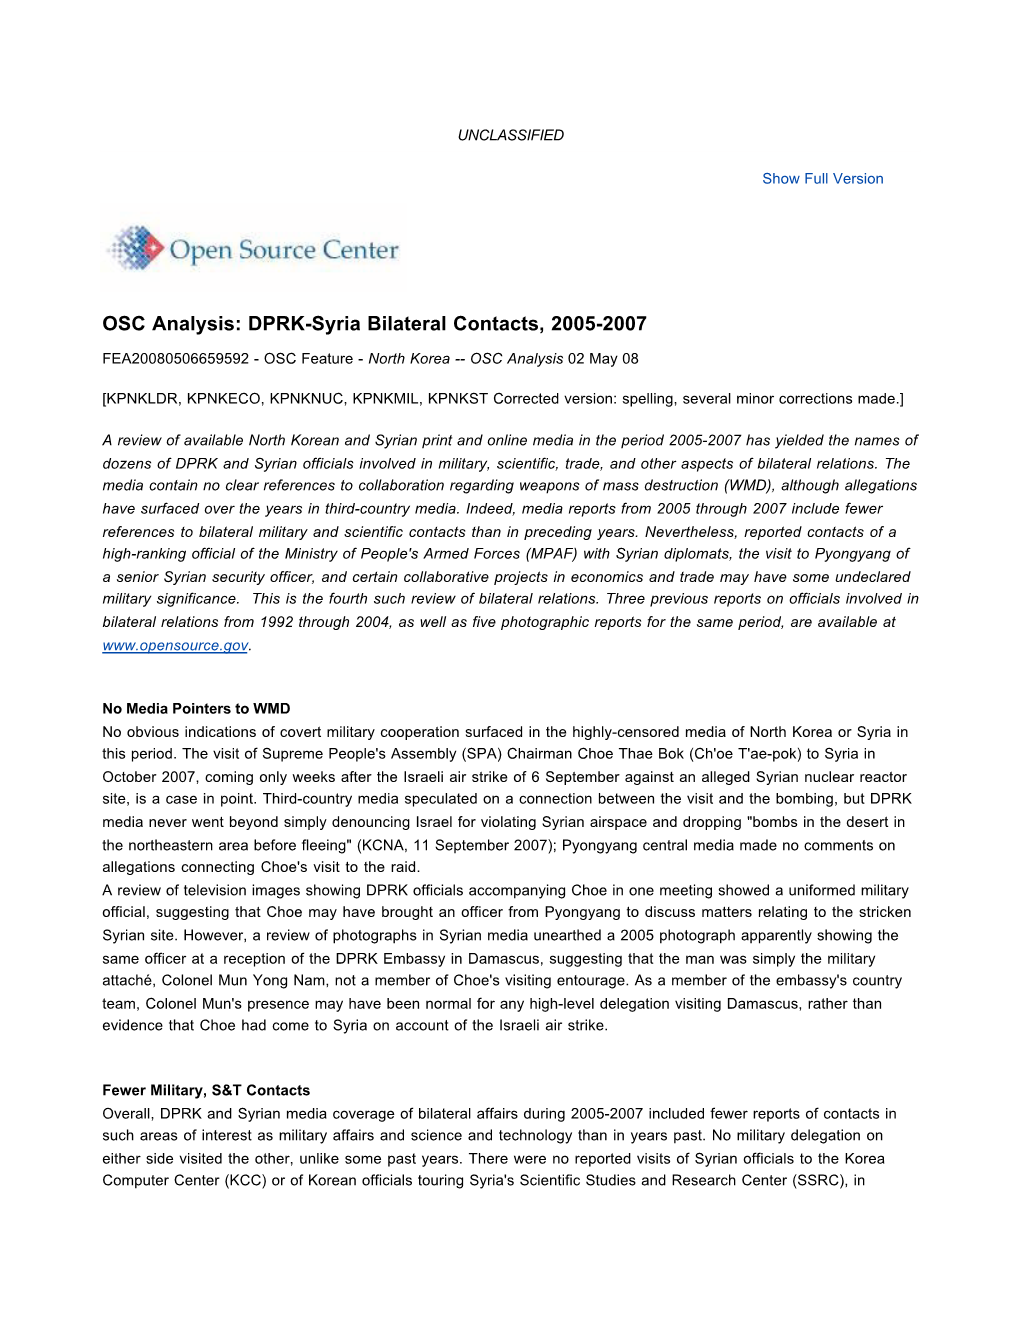 OSC Analysis: DPRK-Syria Bilateral Contacts, 2005-2007